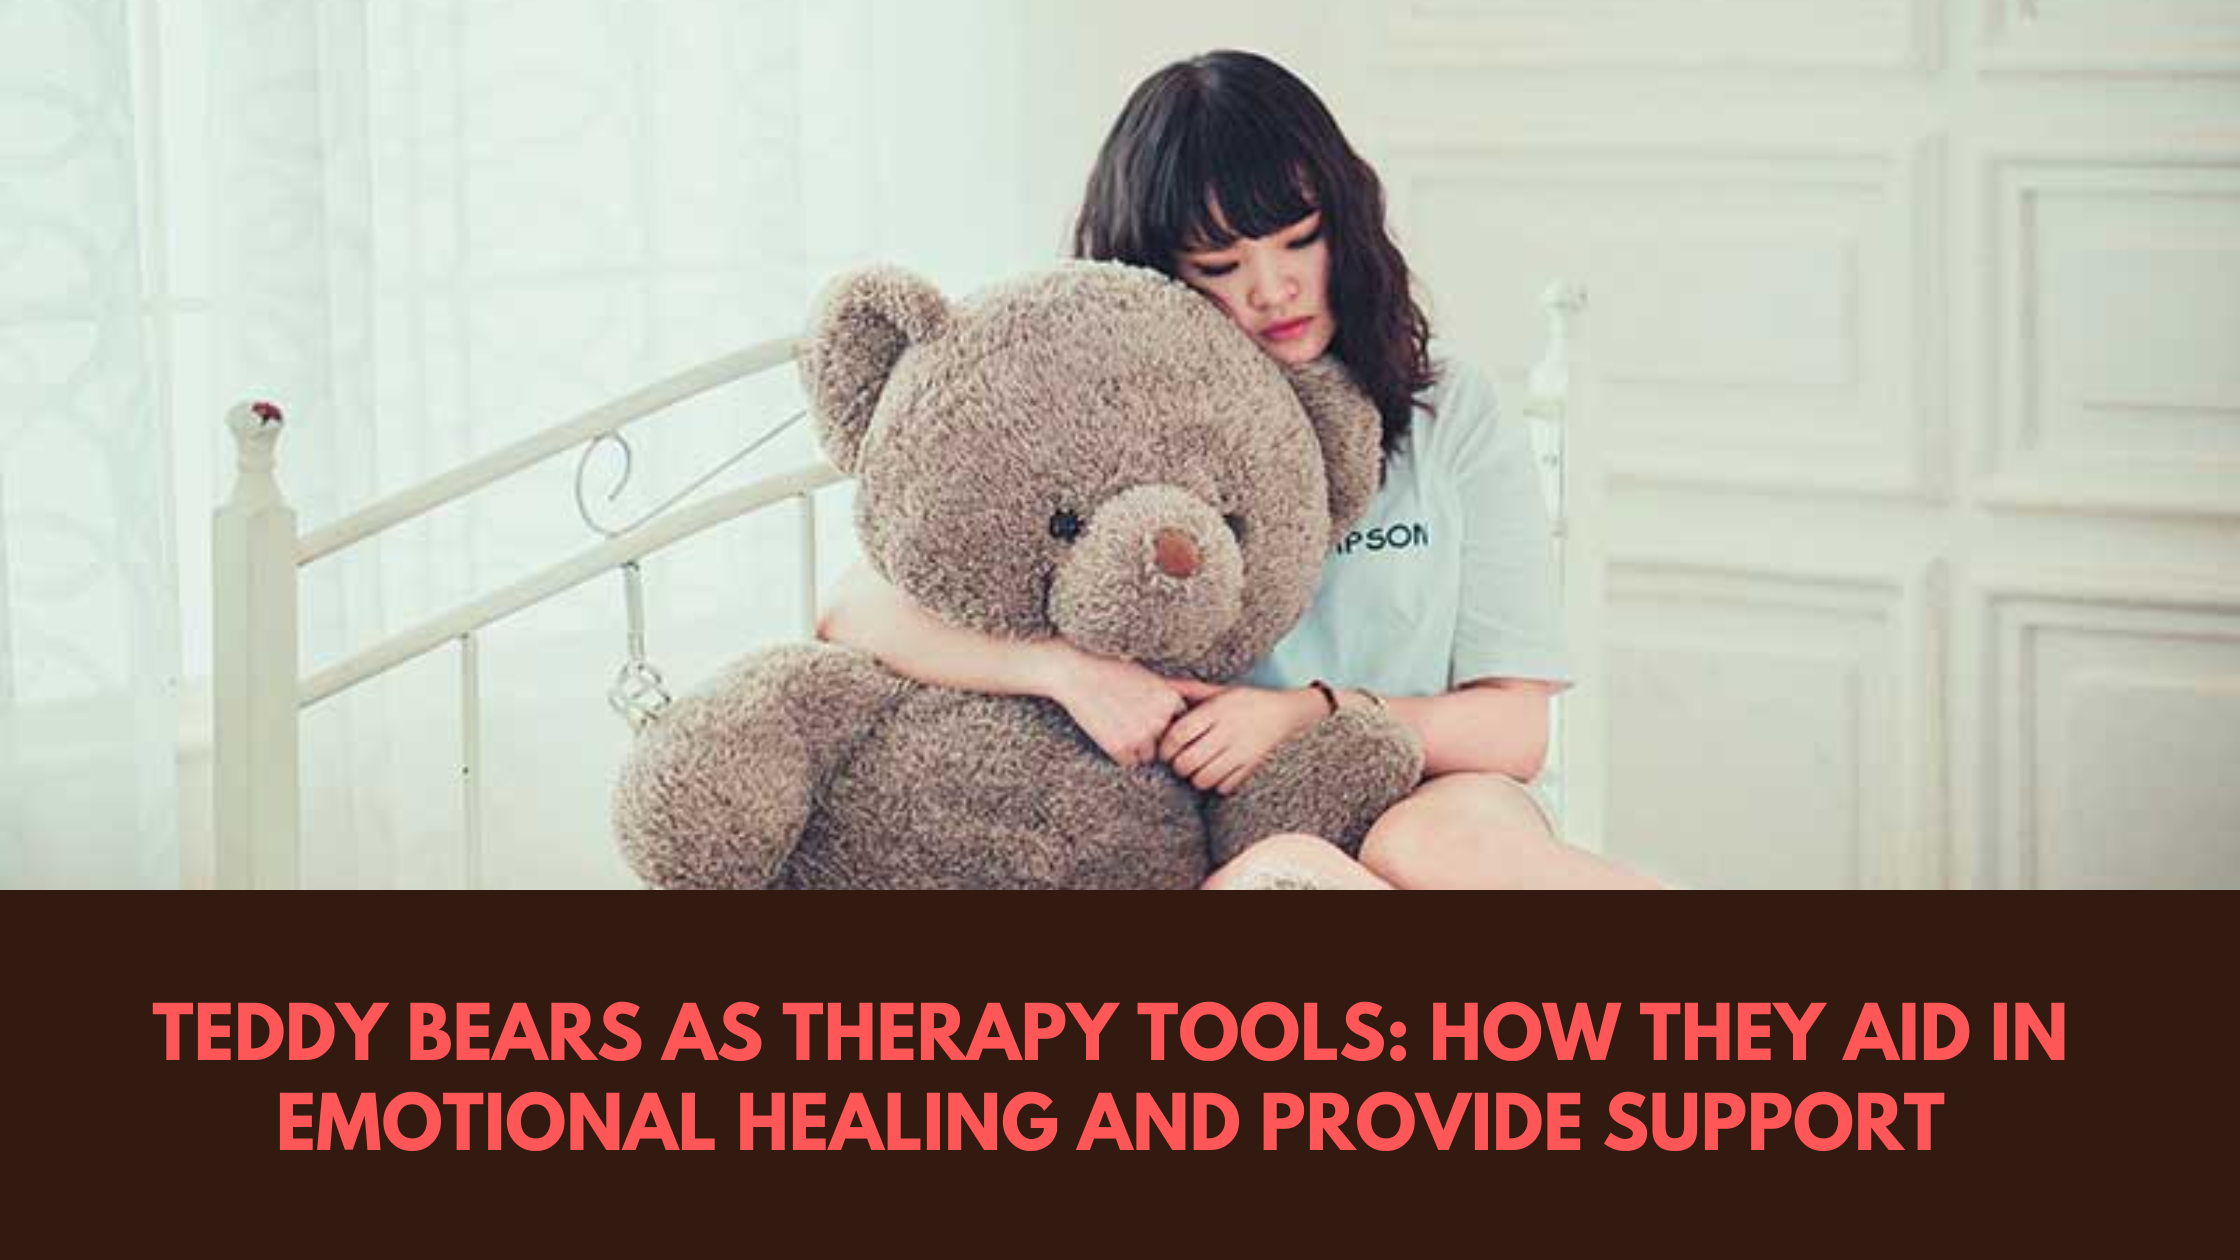 Teddy Bears as Therapy Tools: How They Aid in Emotional Healing and Provide Support